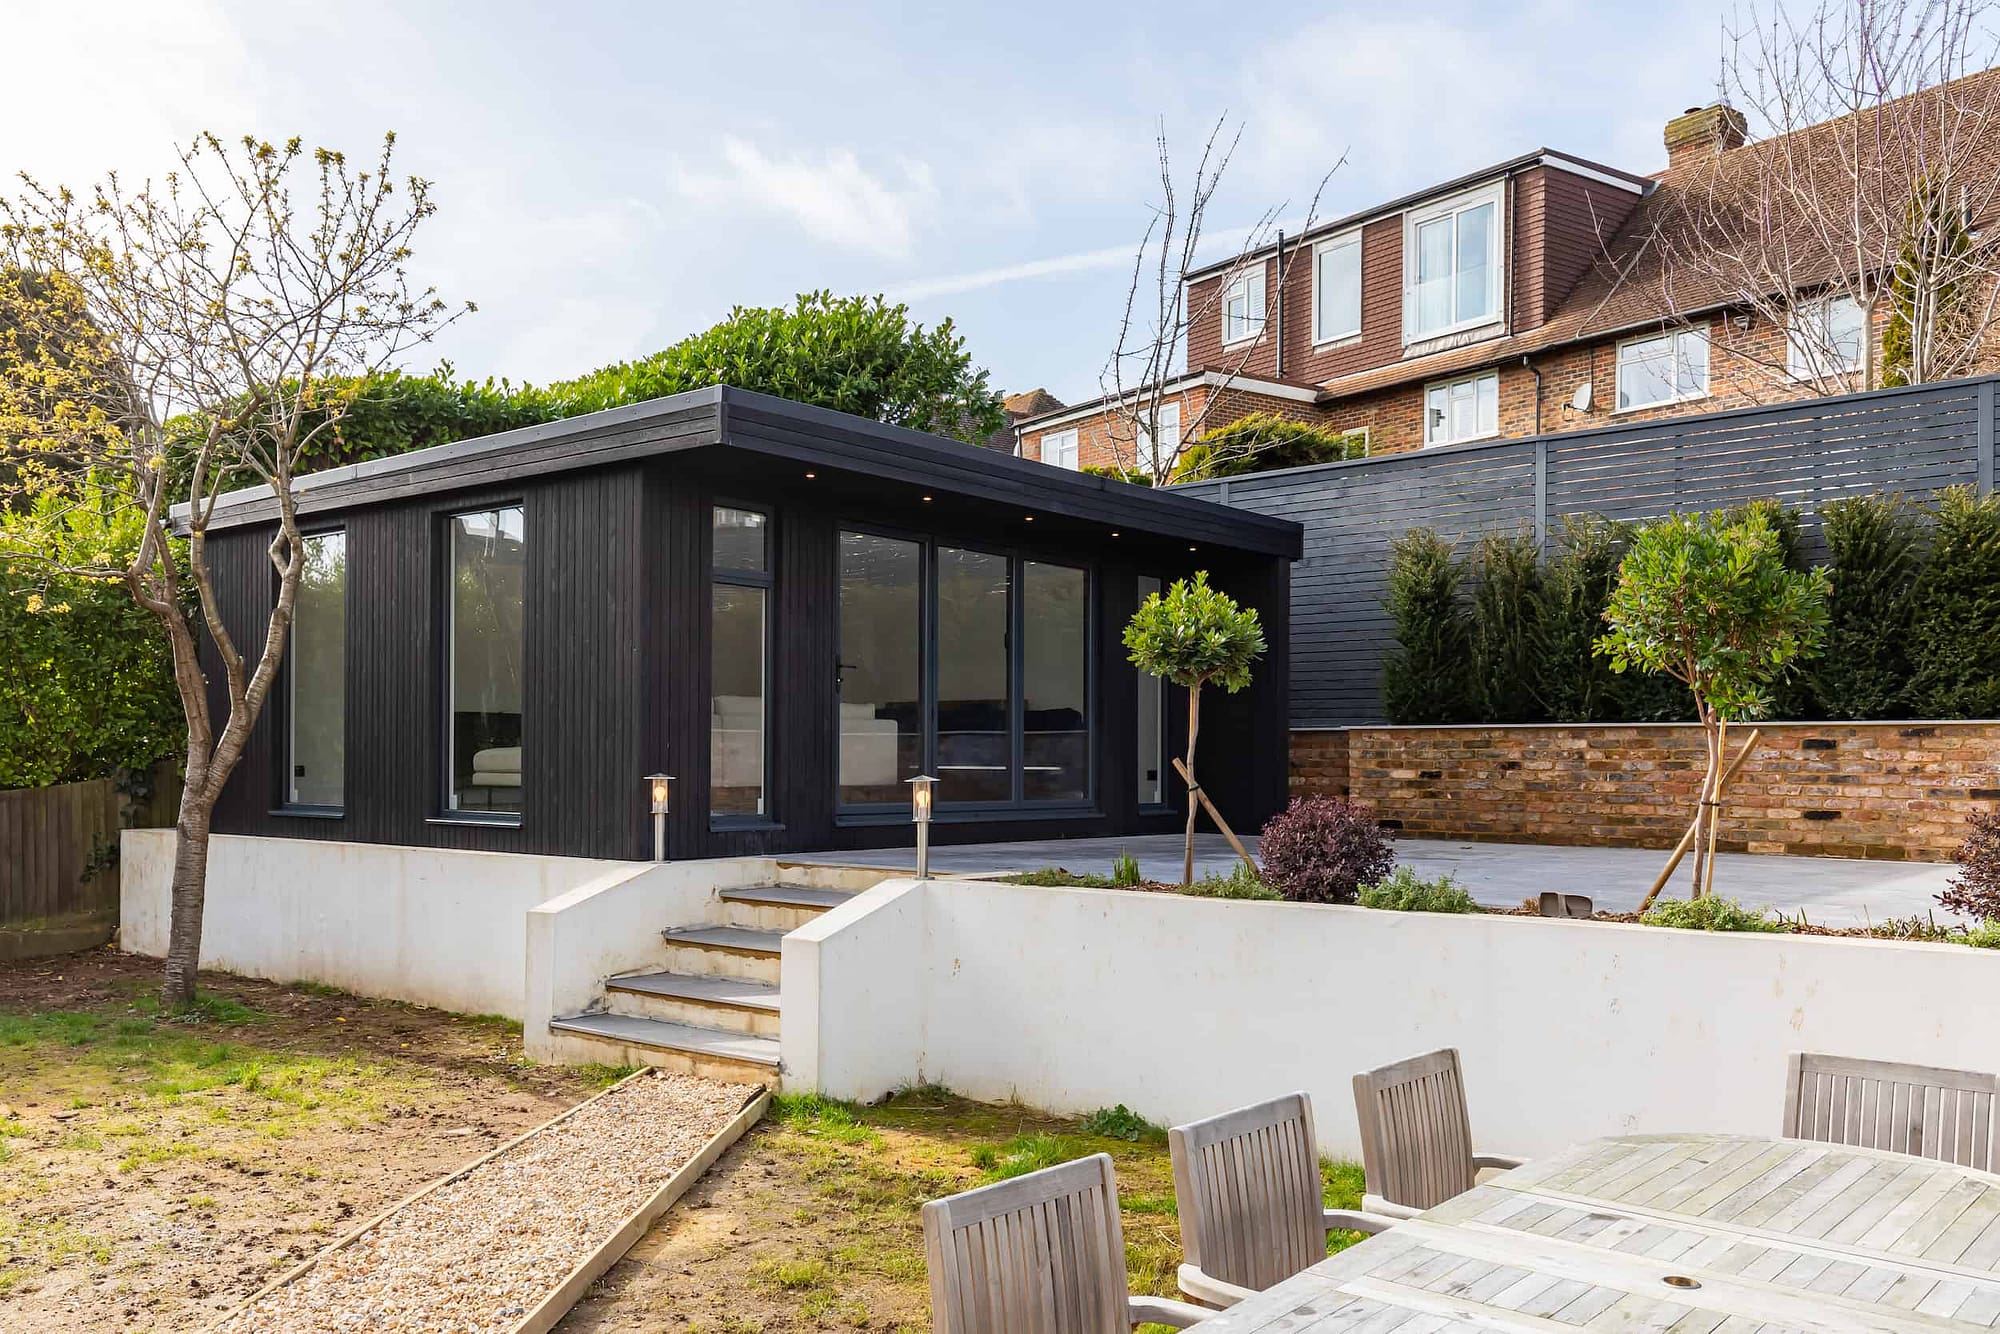 Garden room with landscaped garden and black wood exterior.